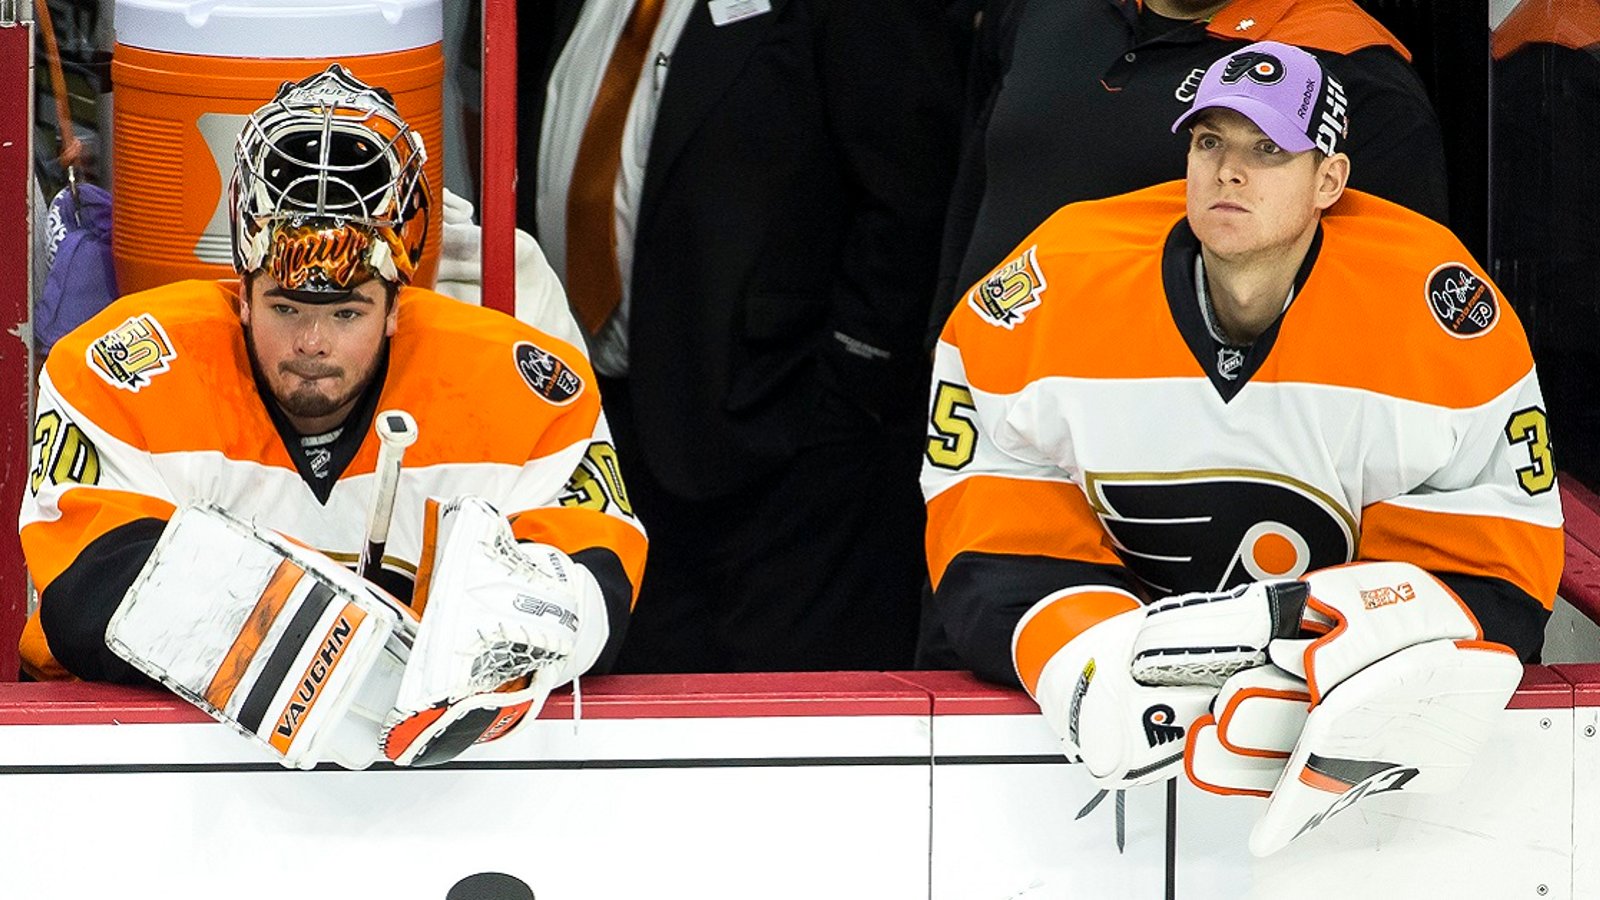 No.1 goalie's injury more serious that expected, will miss more than a month.